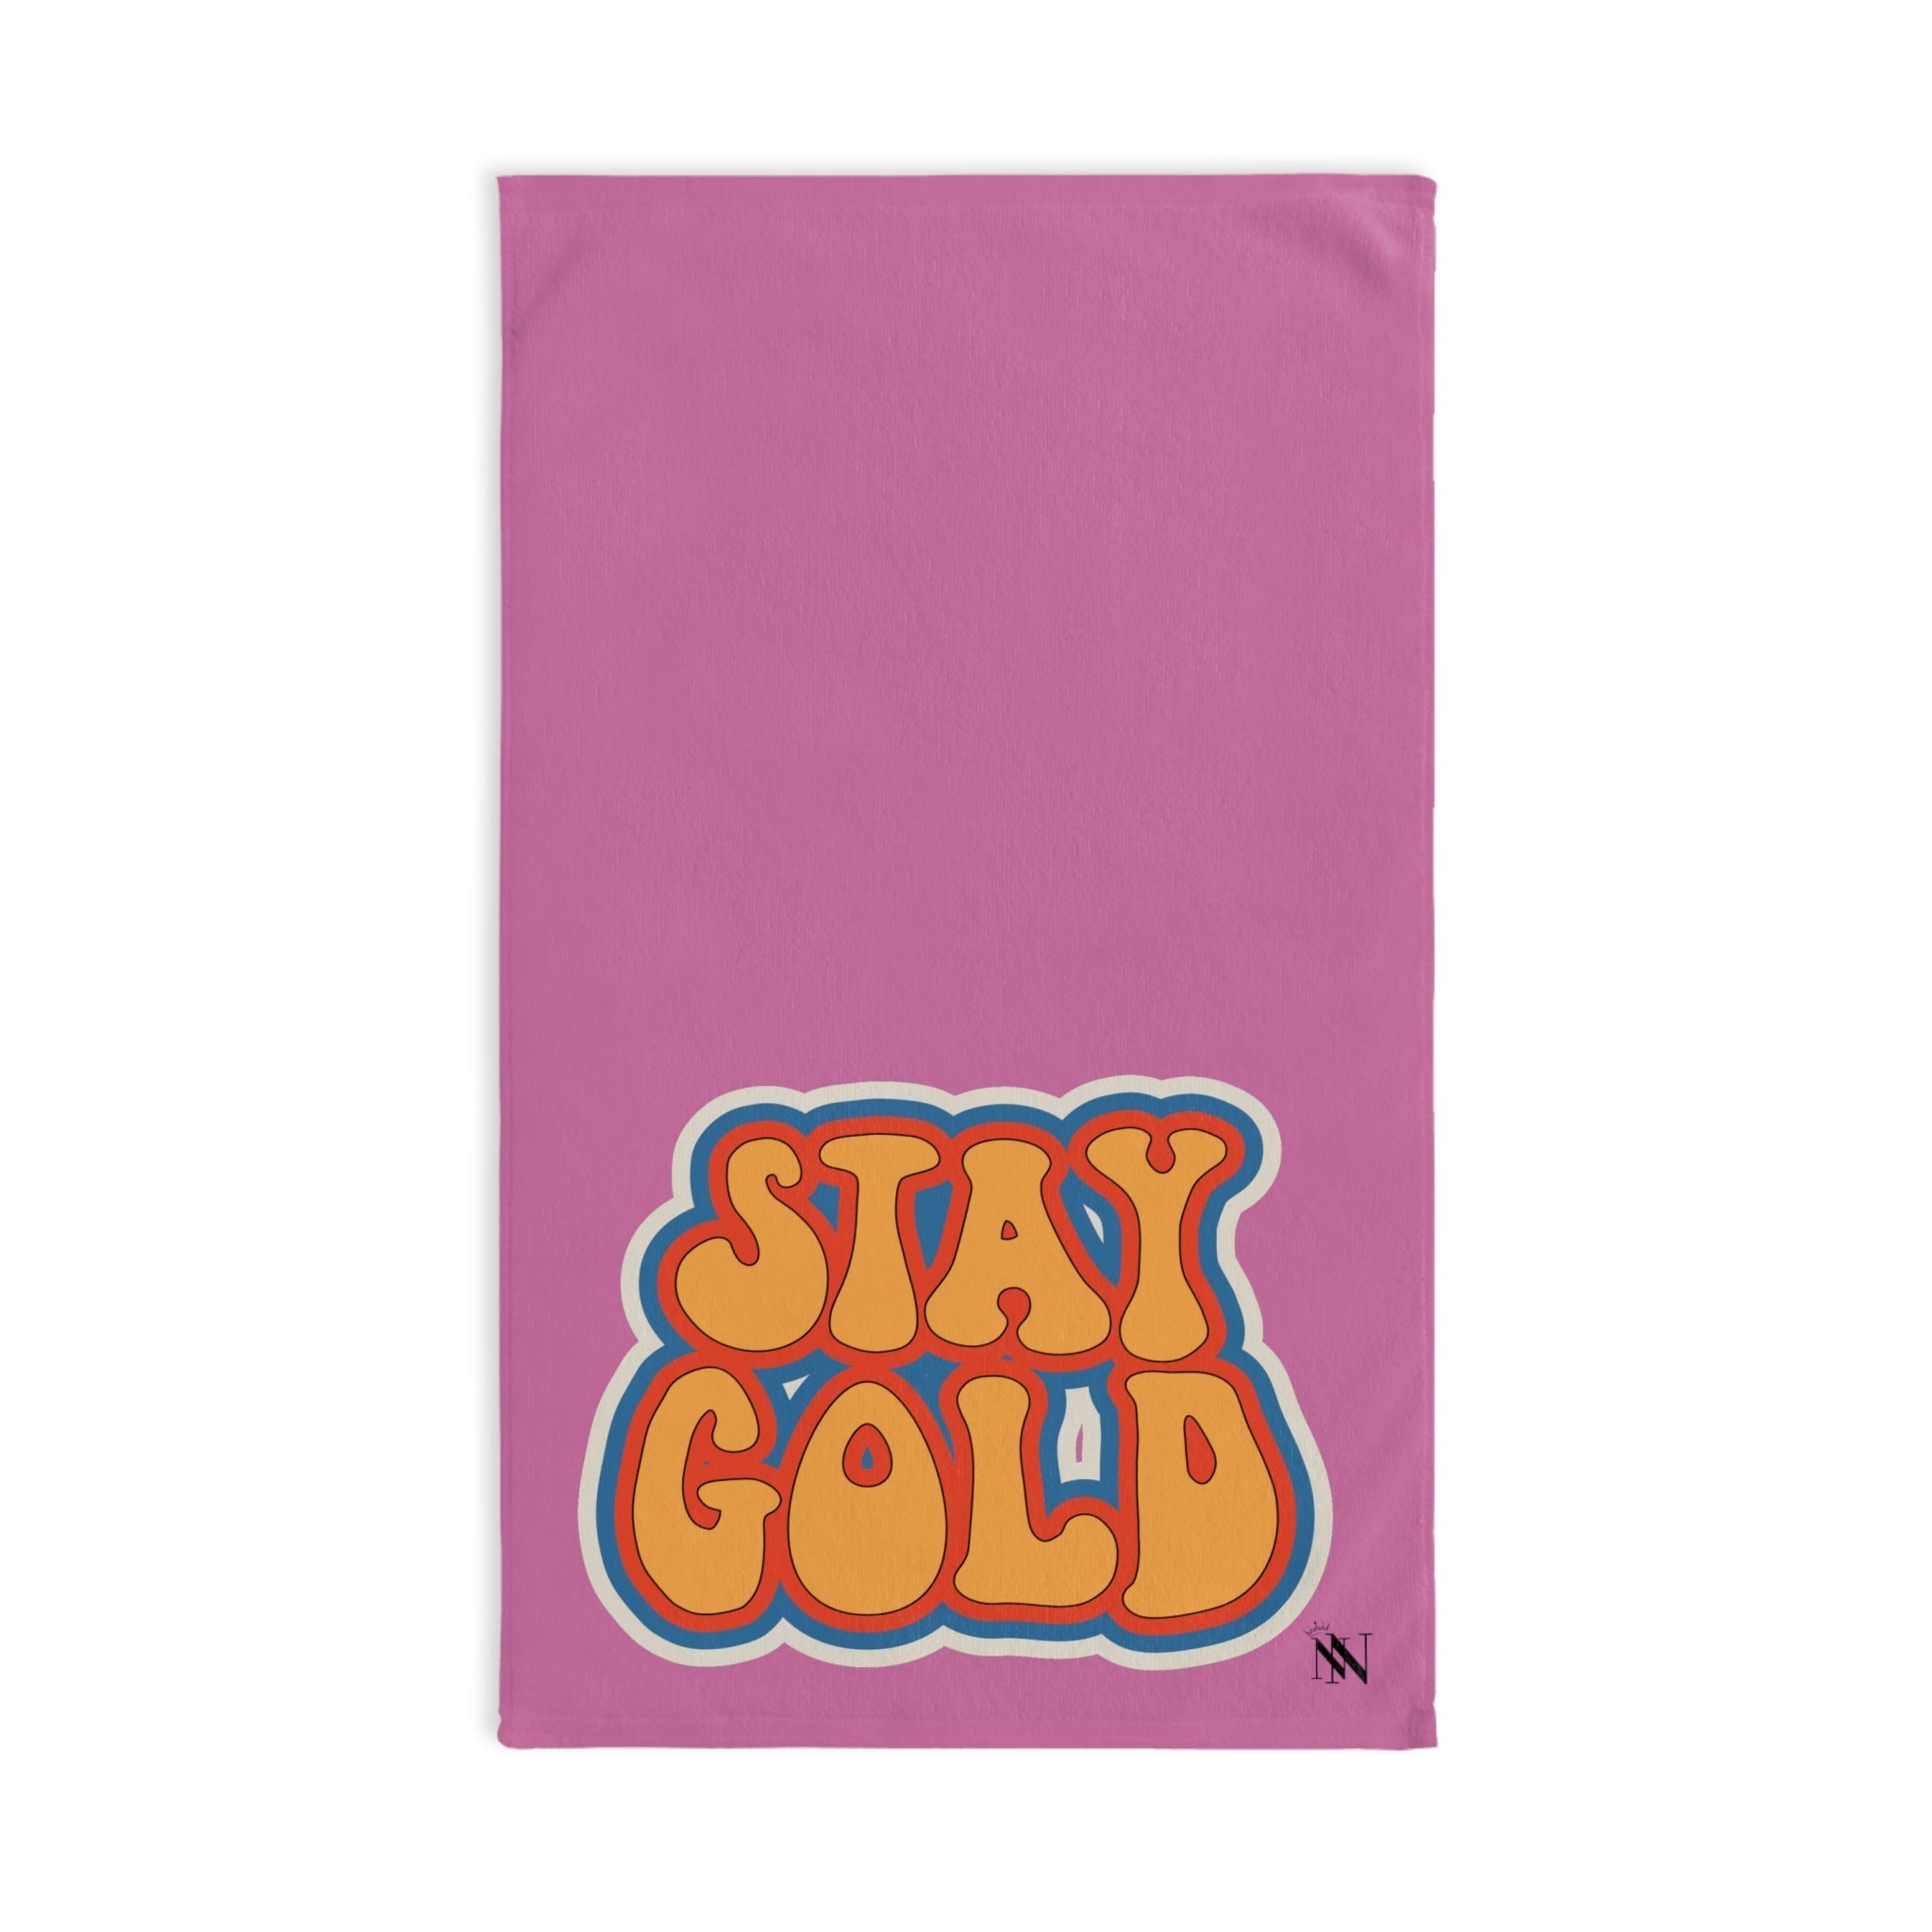 Stay Gold RetroPink | Novelty Gifts for Boyfriend, Funny Towel Romantic Gift for Wedding Couple Fiance First Year Anniversary Valentines, Party Gag Gifts, Joke Humor Cloth for Husband Men BF NECTAR NAPKINS